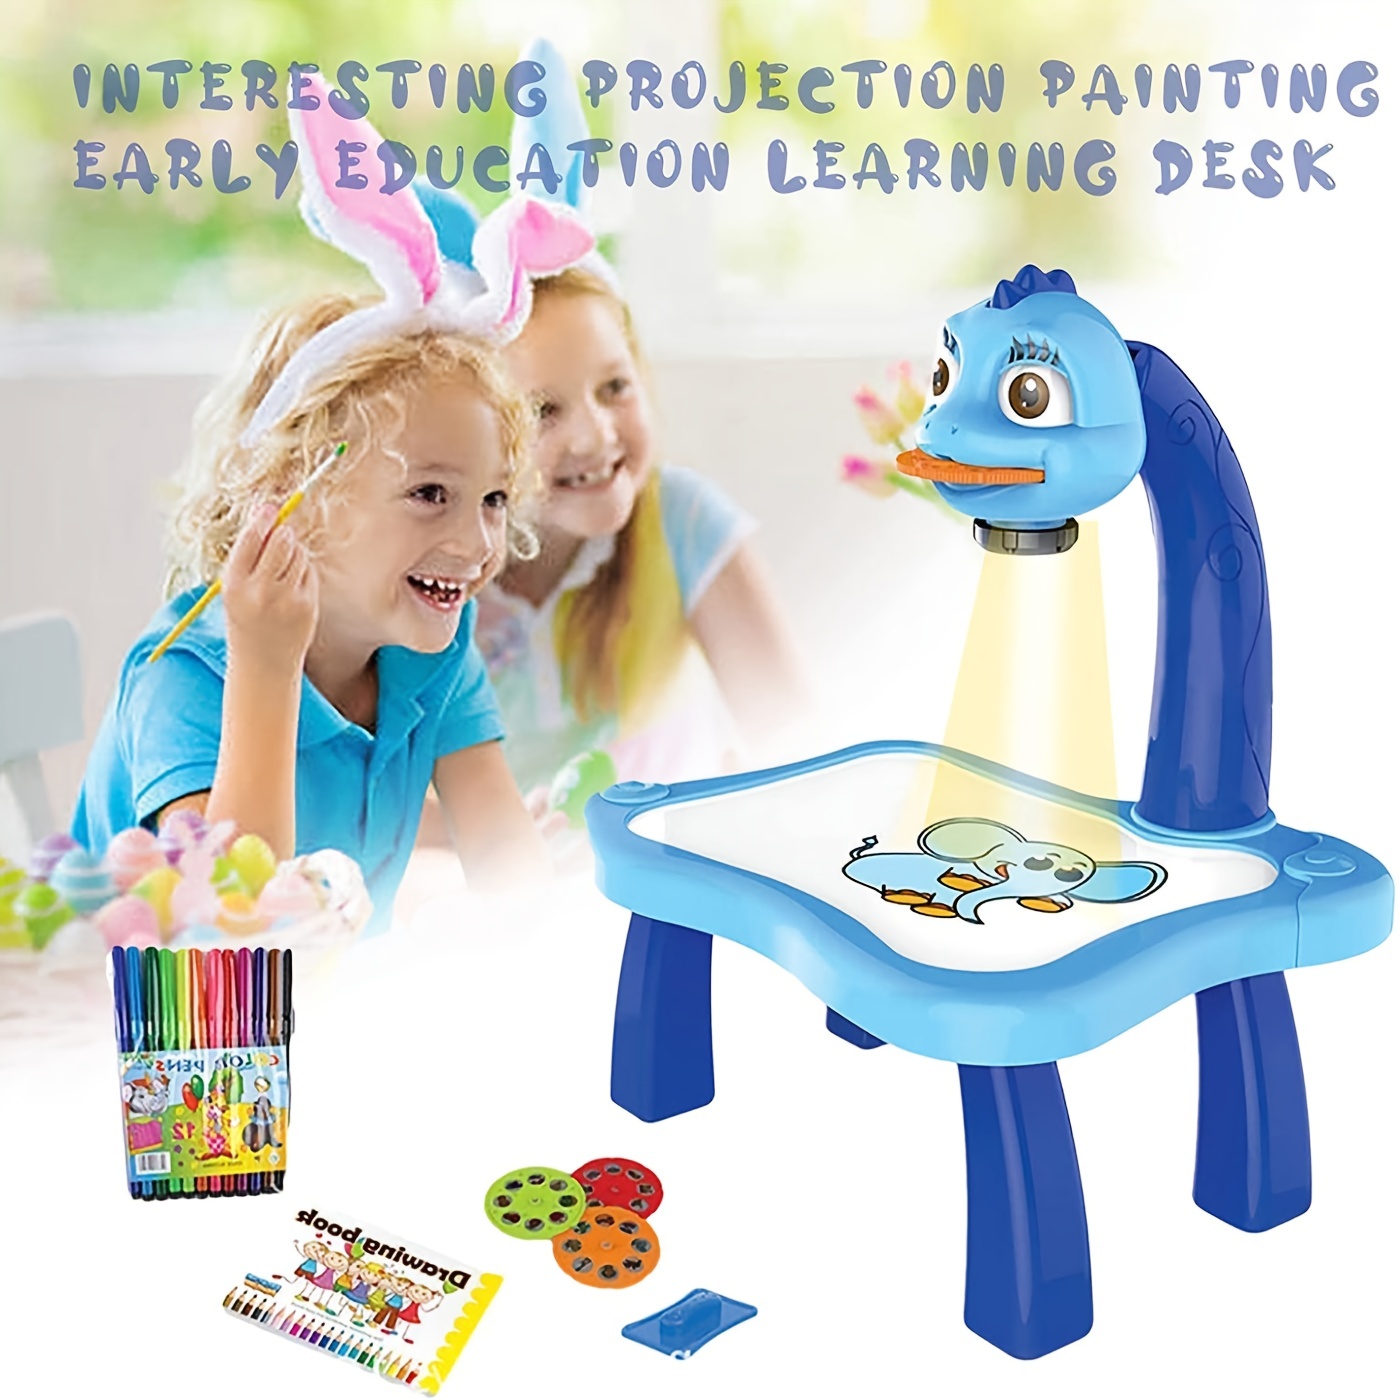  Kids Drawing Projector, Children Smart Sketch Projector Kit, Drawing  Projector Table for Kids, Trace and Draw Projector Toy for Toddler